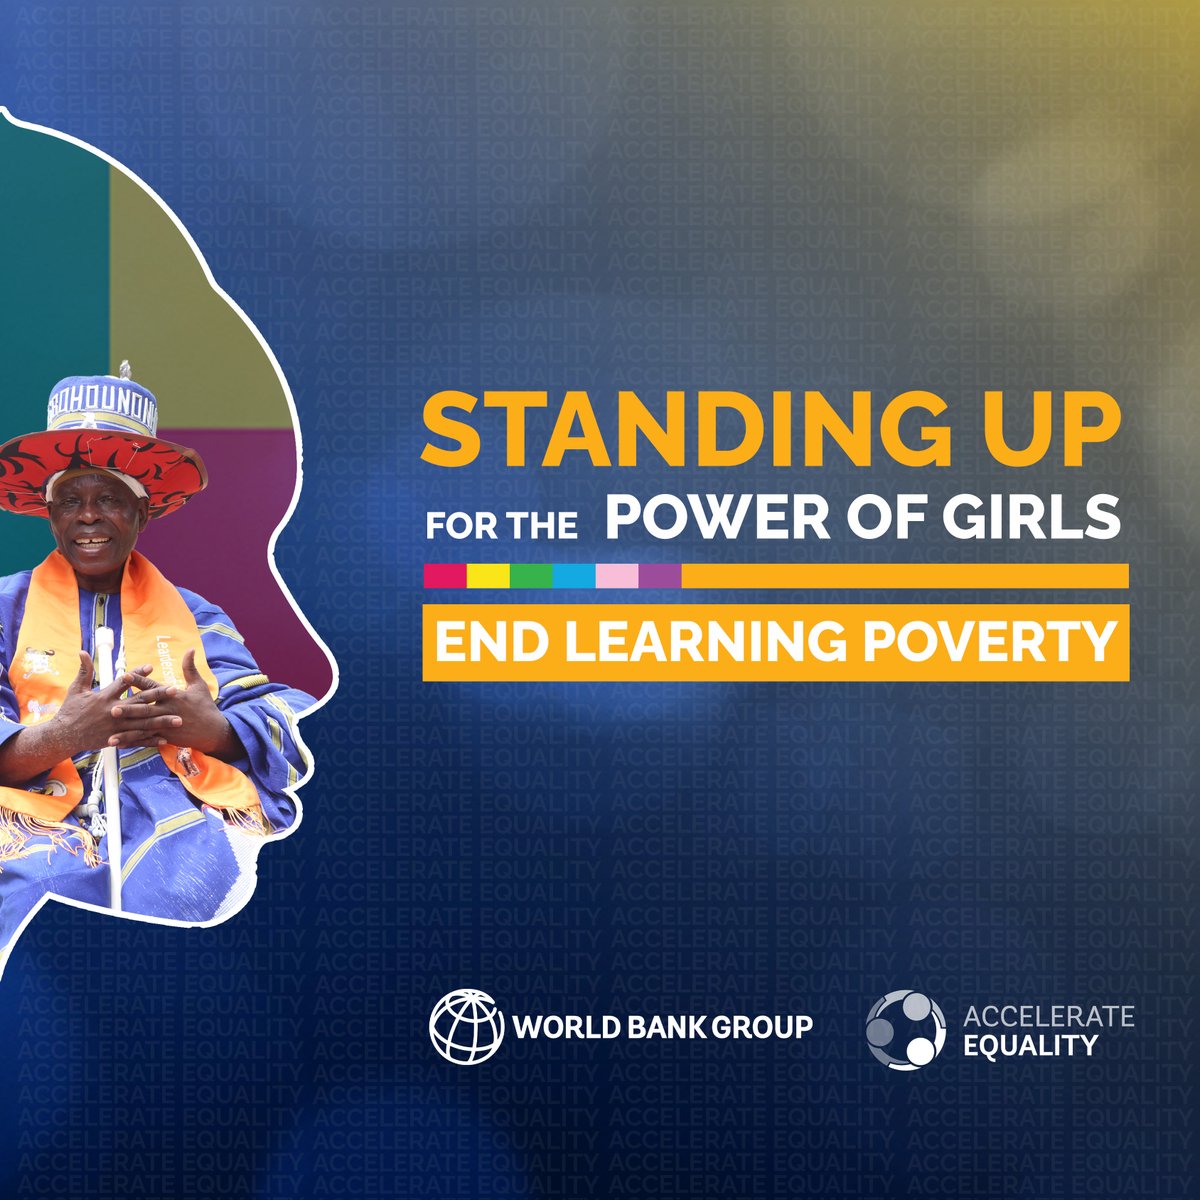 Dada, King of the Seas and Oceans, a spiritual leader in #Benin is a champion for girls' education. Discover why he is passionate about creating a world where girls thrive. 🚀 wrld.bg/cLLI50QMfrE #AfricaACTs to #AccelerateEquality